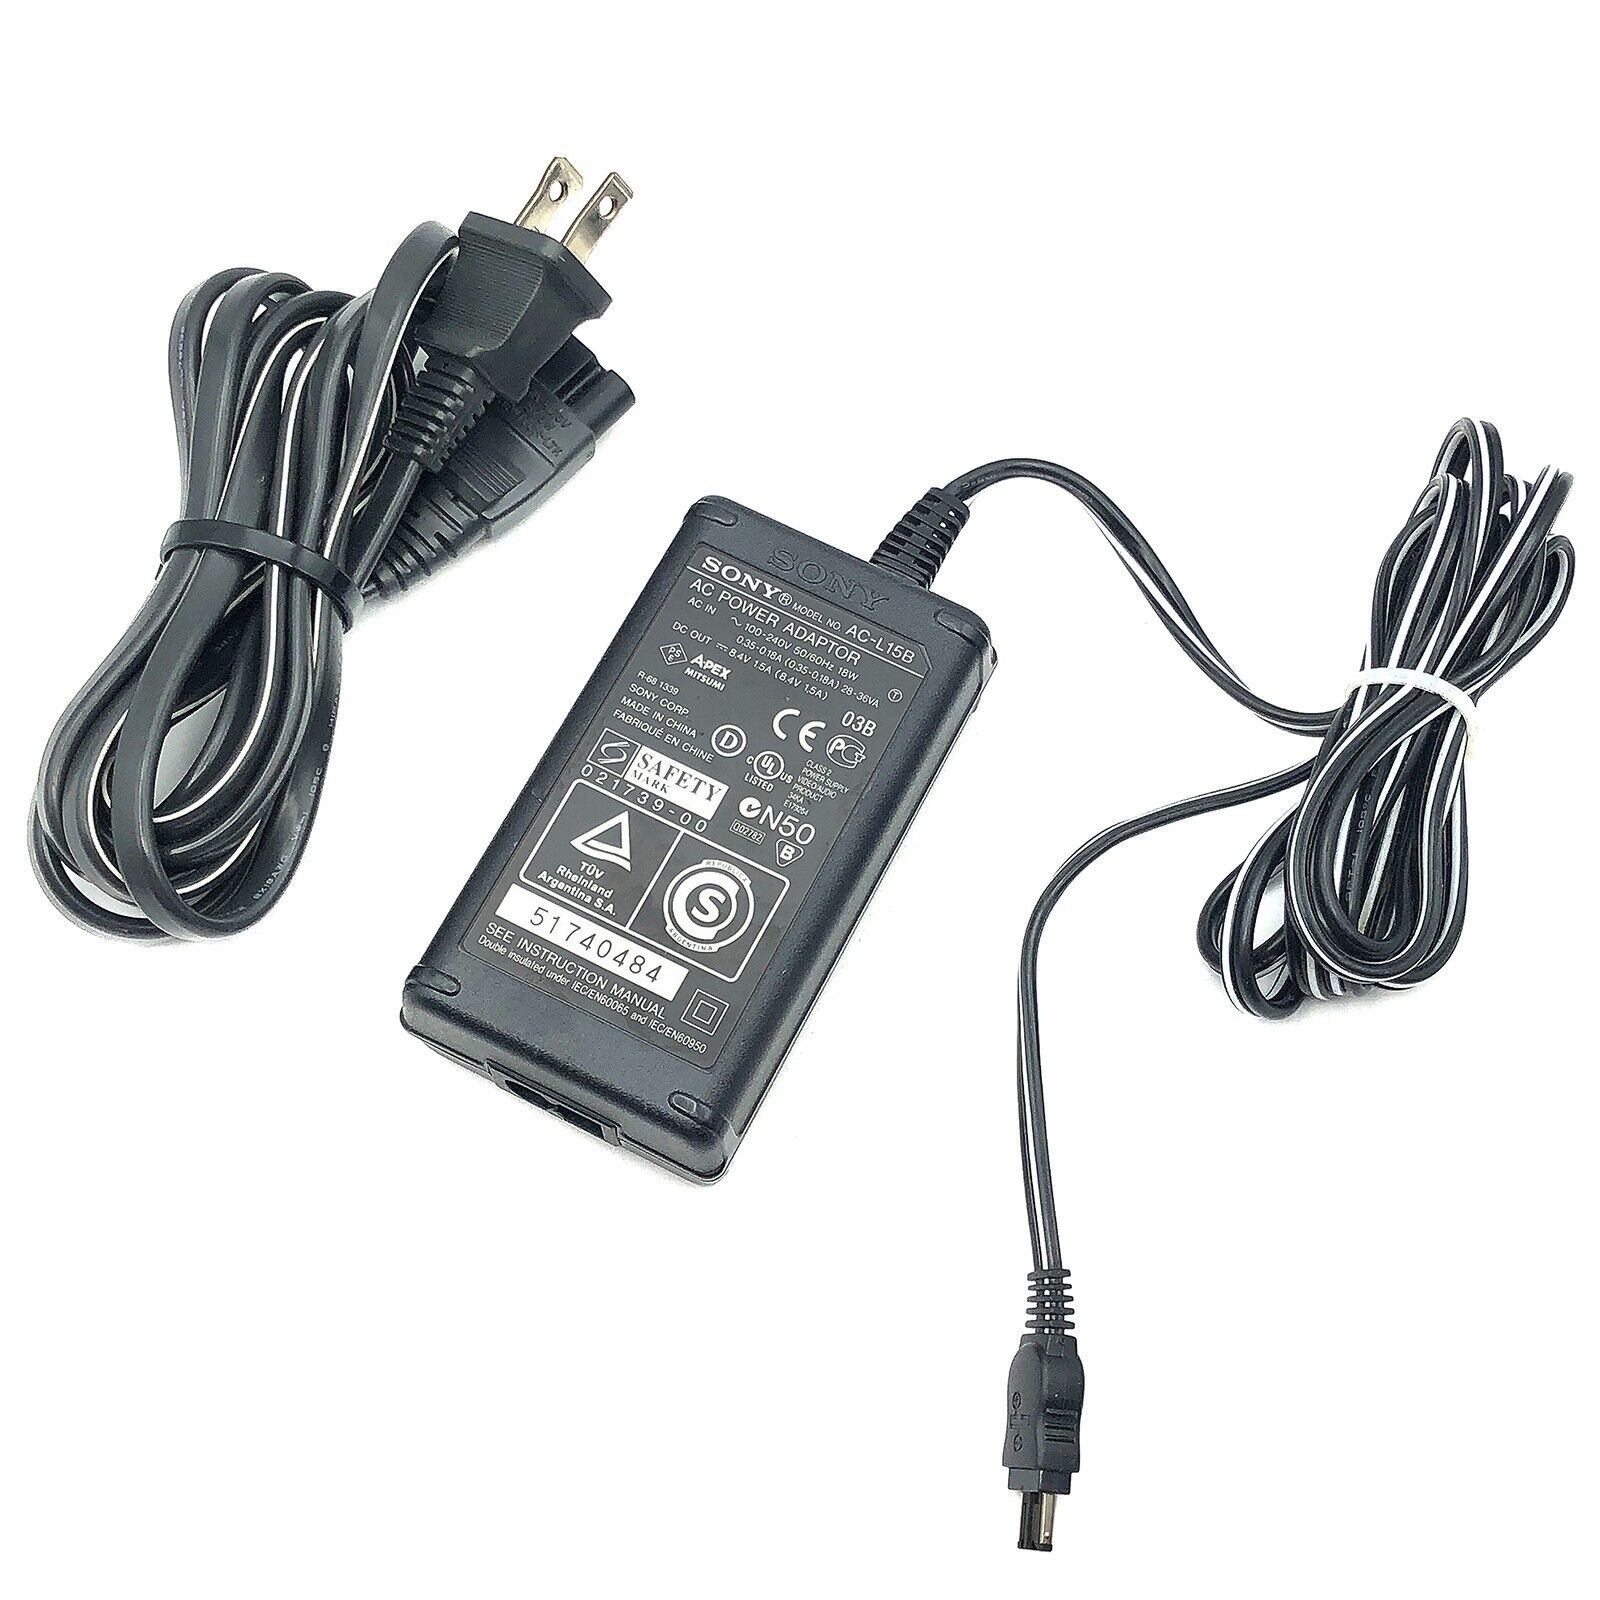 Original Sony AC Adapter For CCD-TRV138 Handycam Camcoder CCD-TRV318 W/P.Cord